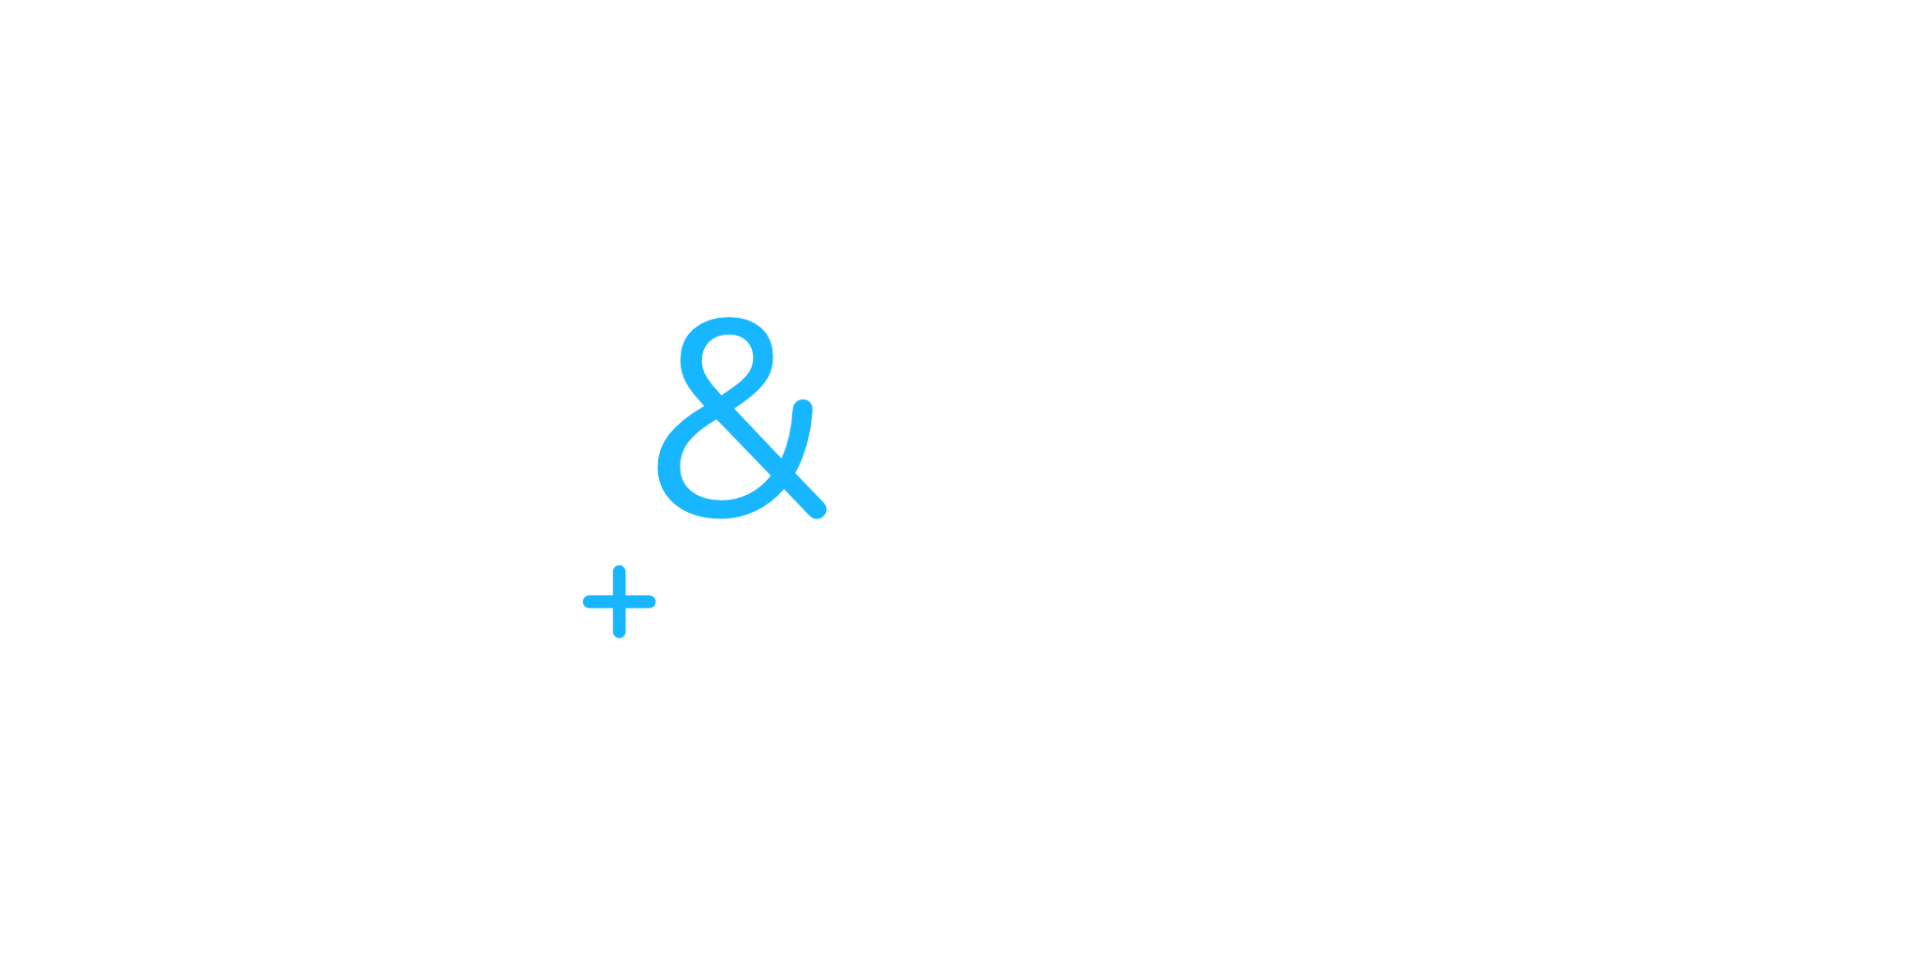 Art & Design: Games and Playable Media